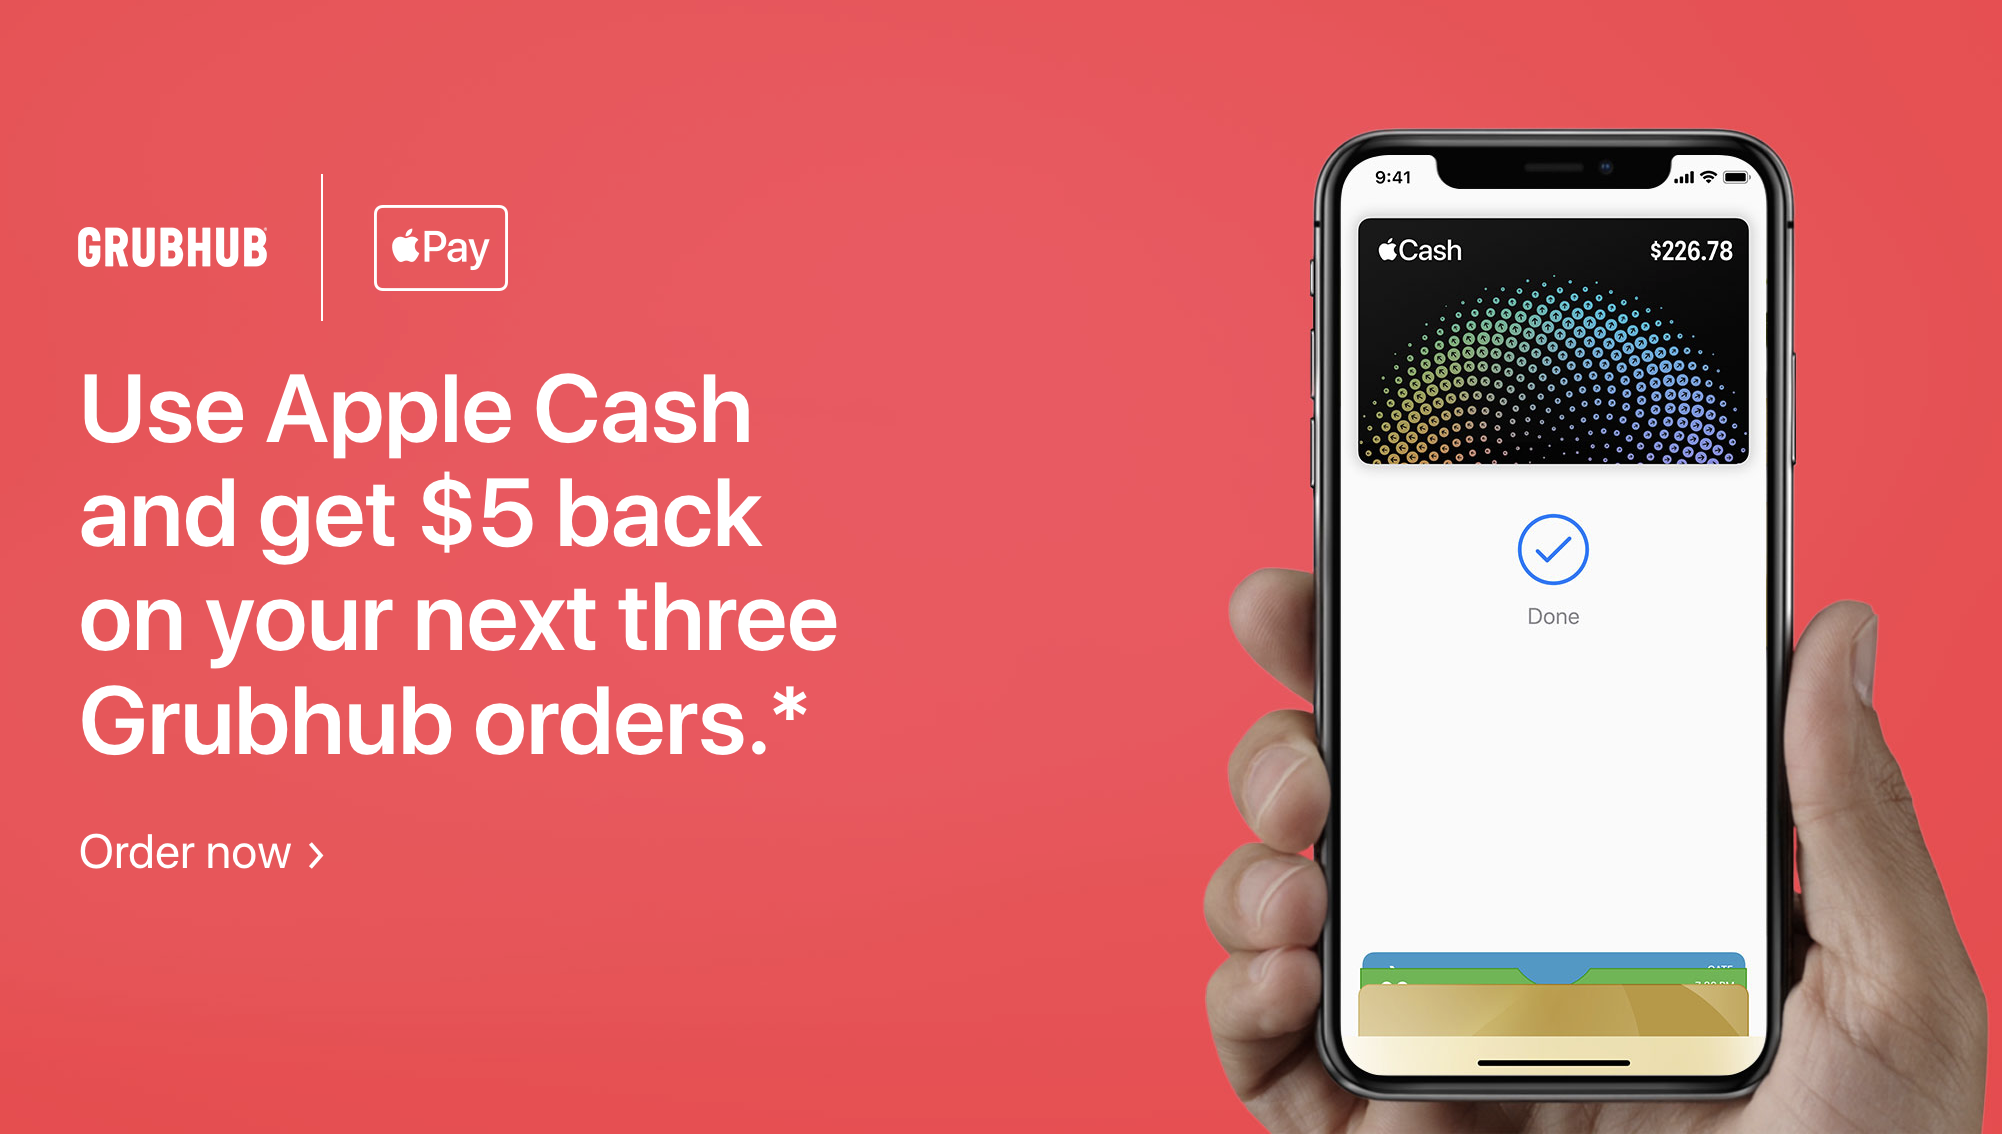 If You Have An iPhone, You Can Get Up to 33% Cash Back at GrubHub